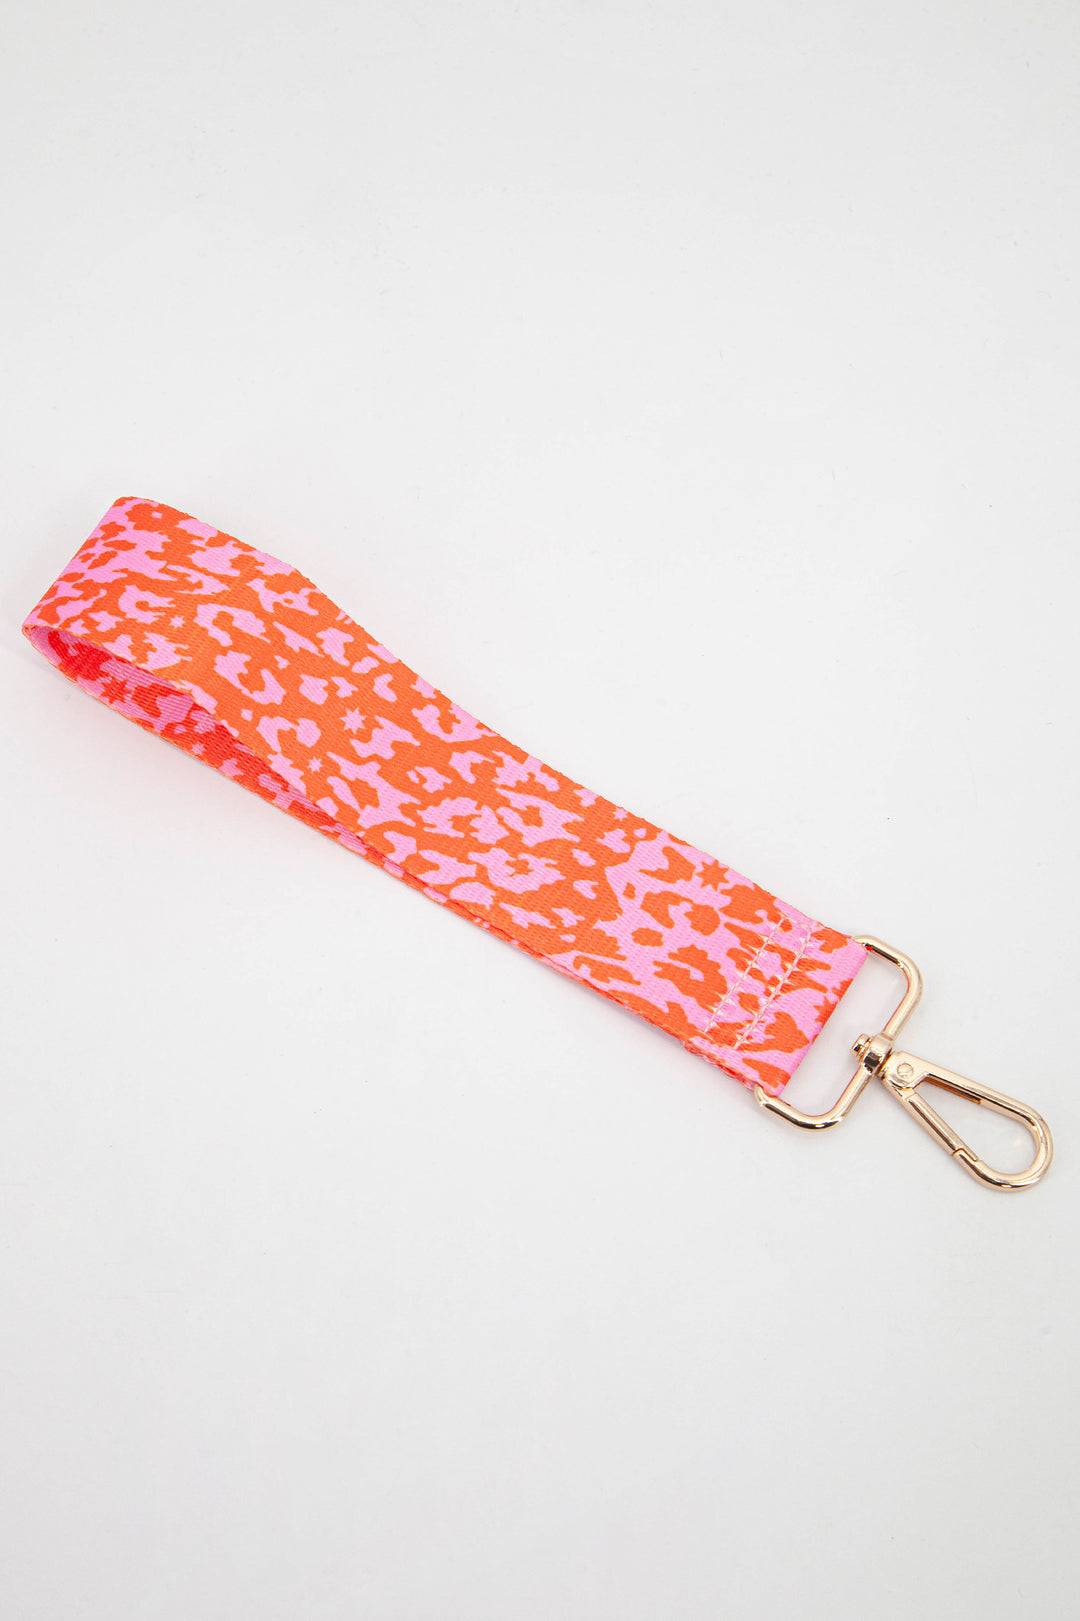 pink and orange leopard print wristlet bag strap with a subtle scattered star pattern throughout the design